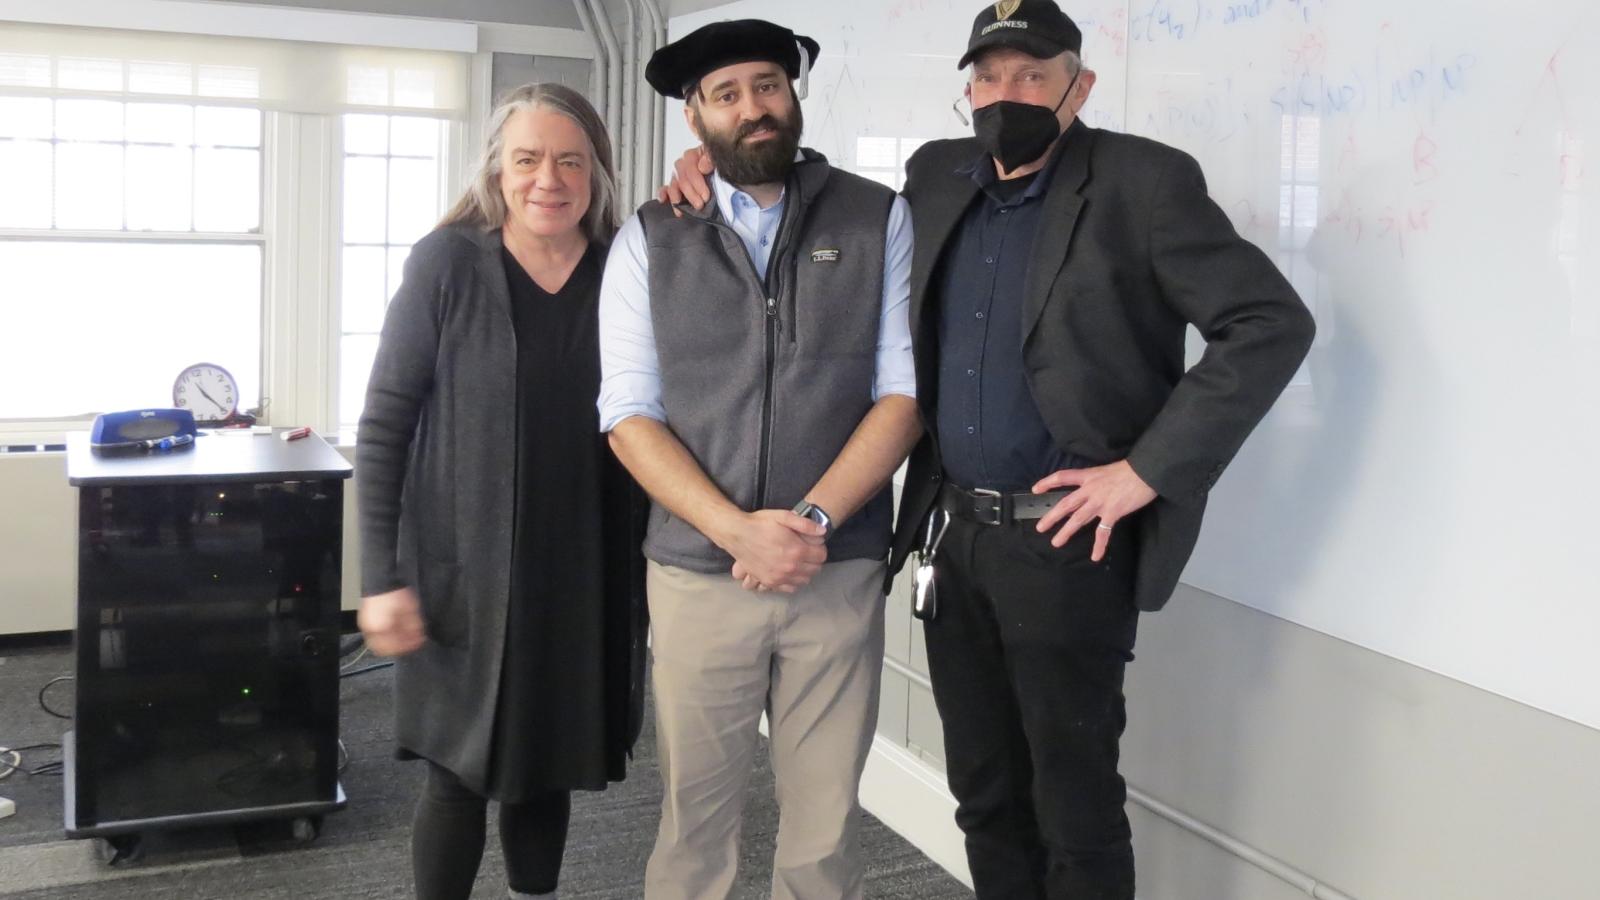 Daniel Puthawala with advisors Shari Speer and Bob Levine after his successful defense